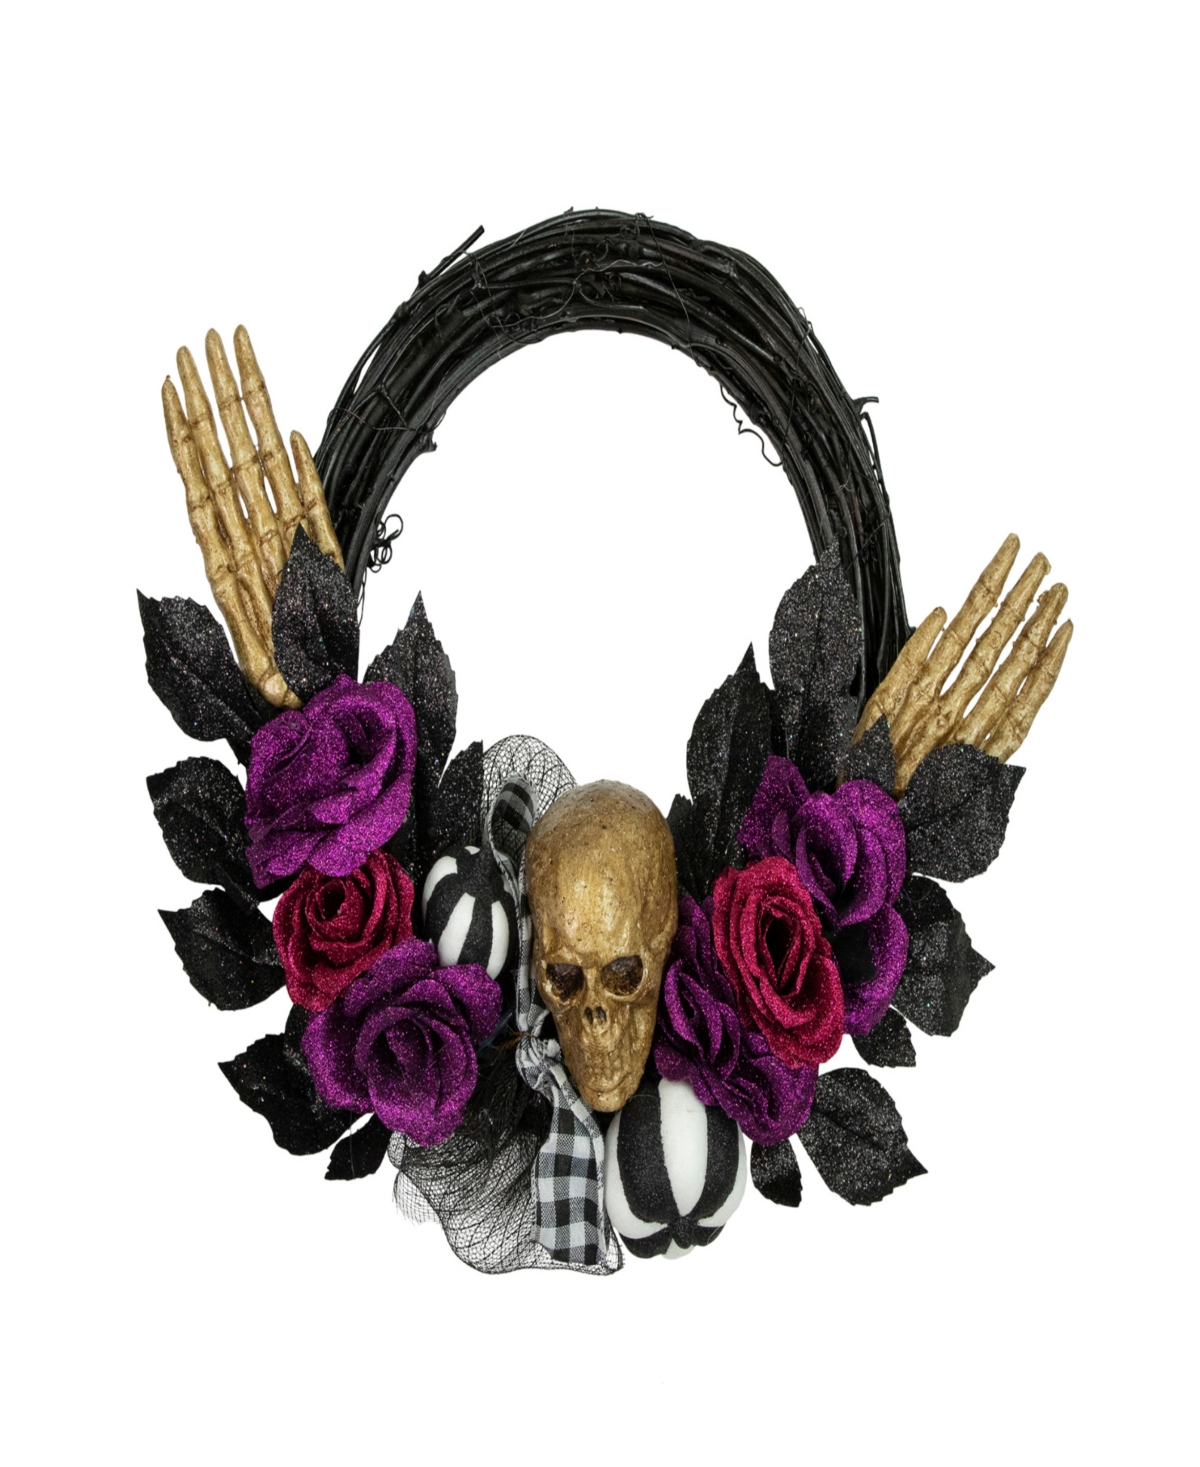 Northlight Skull With Hands And Roses Halloween Twig Wreath, 22" Unlit In Black